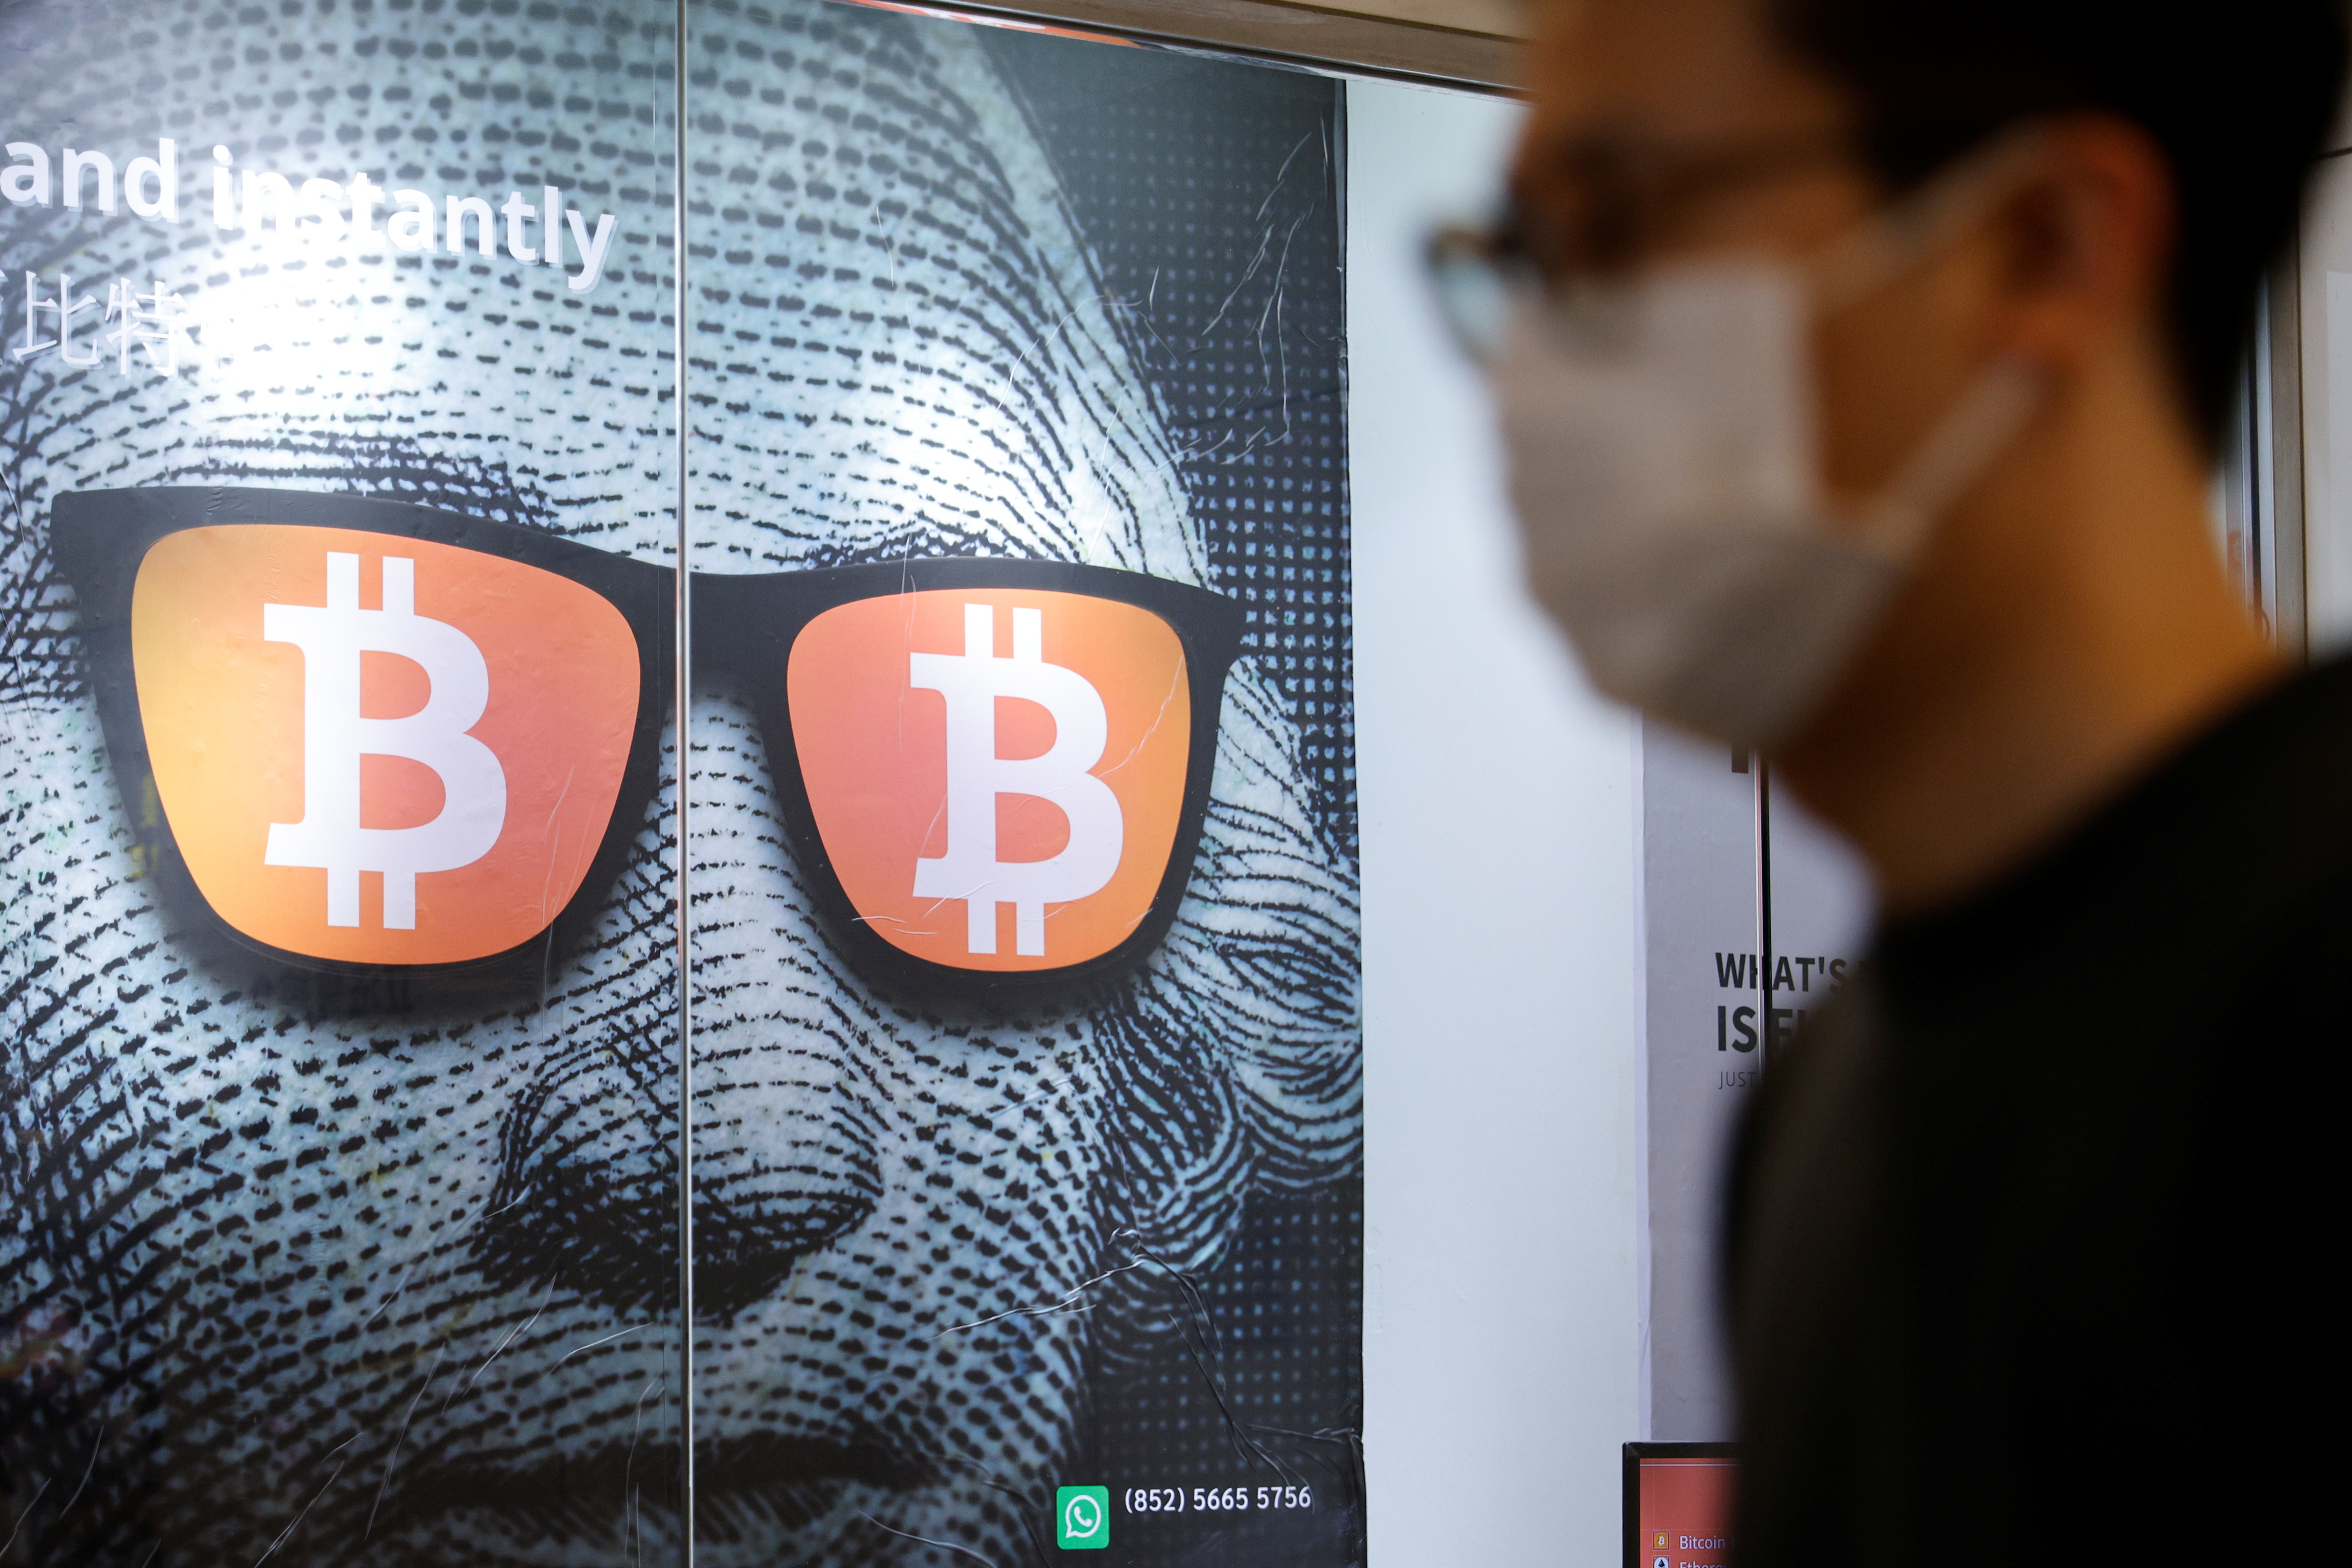 An advertisement for Bitcoin and cryptocurrencies is seen in Hong Kong